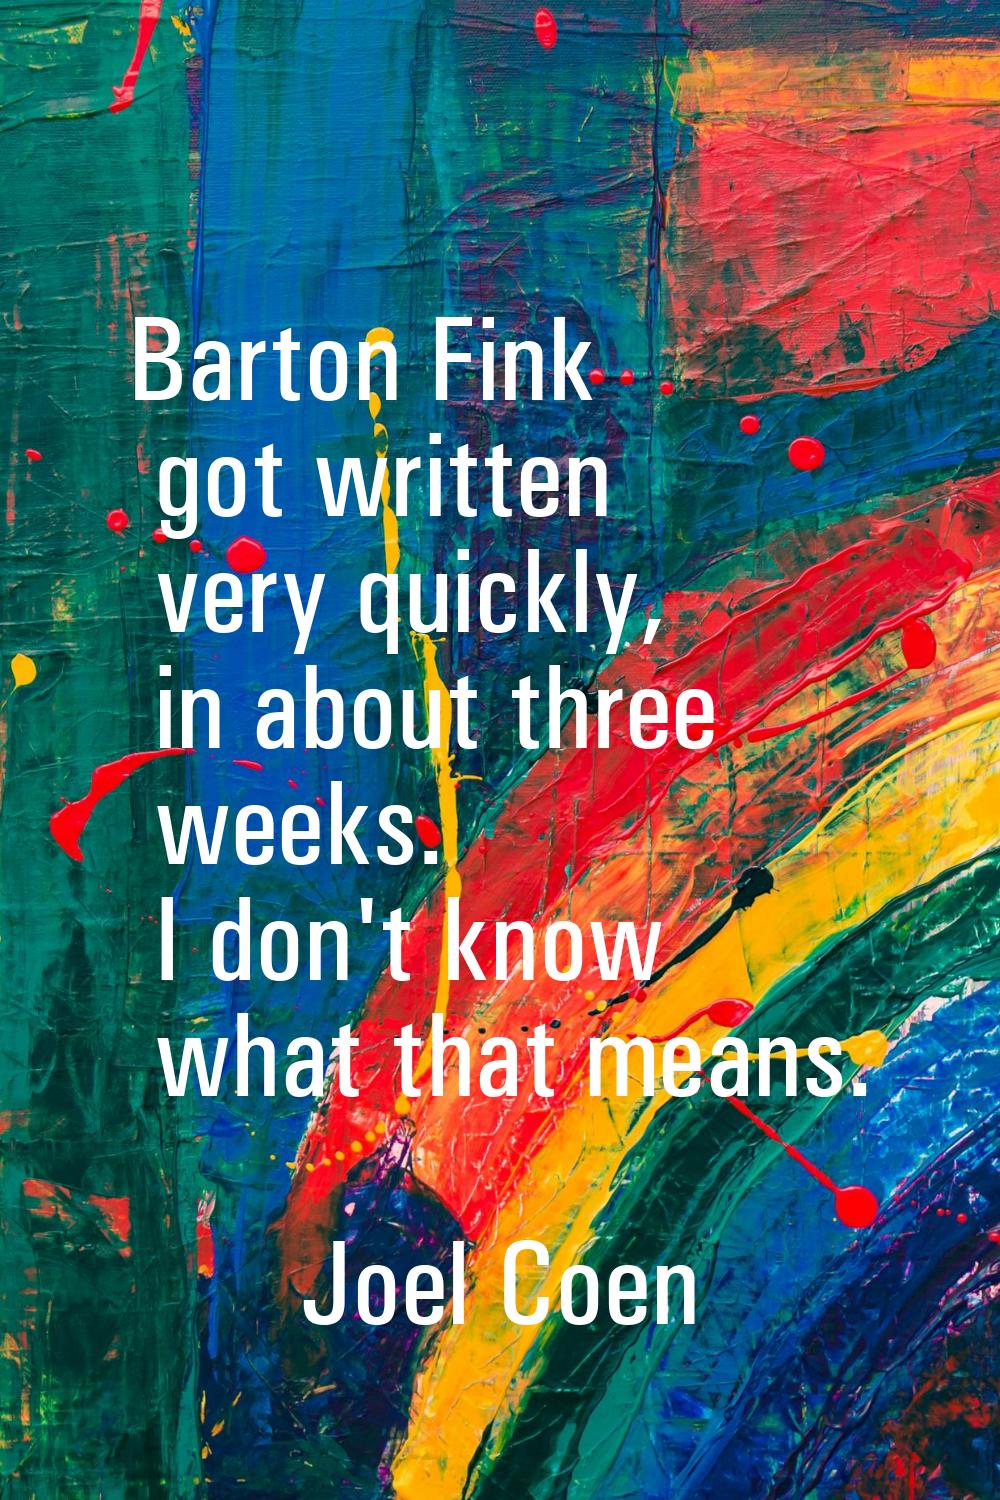 Barton Fink got written very quickly, in about three weeks. I don't know what that means.